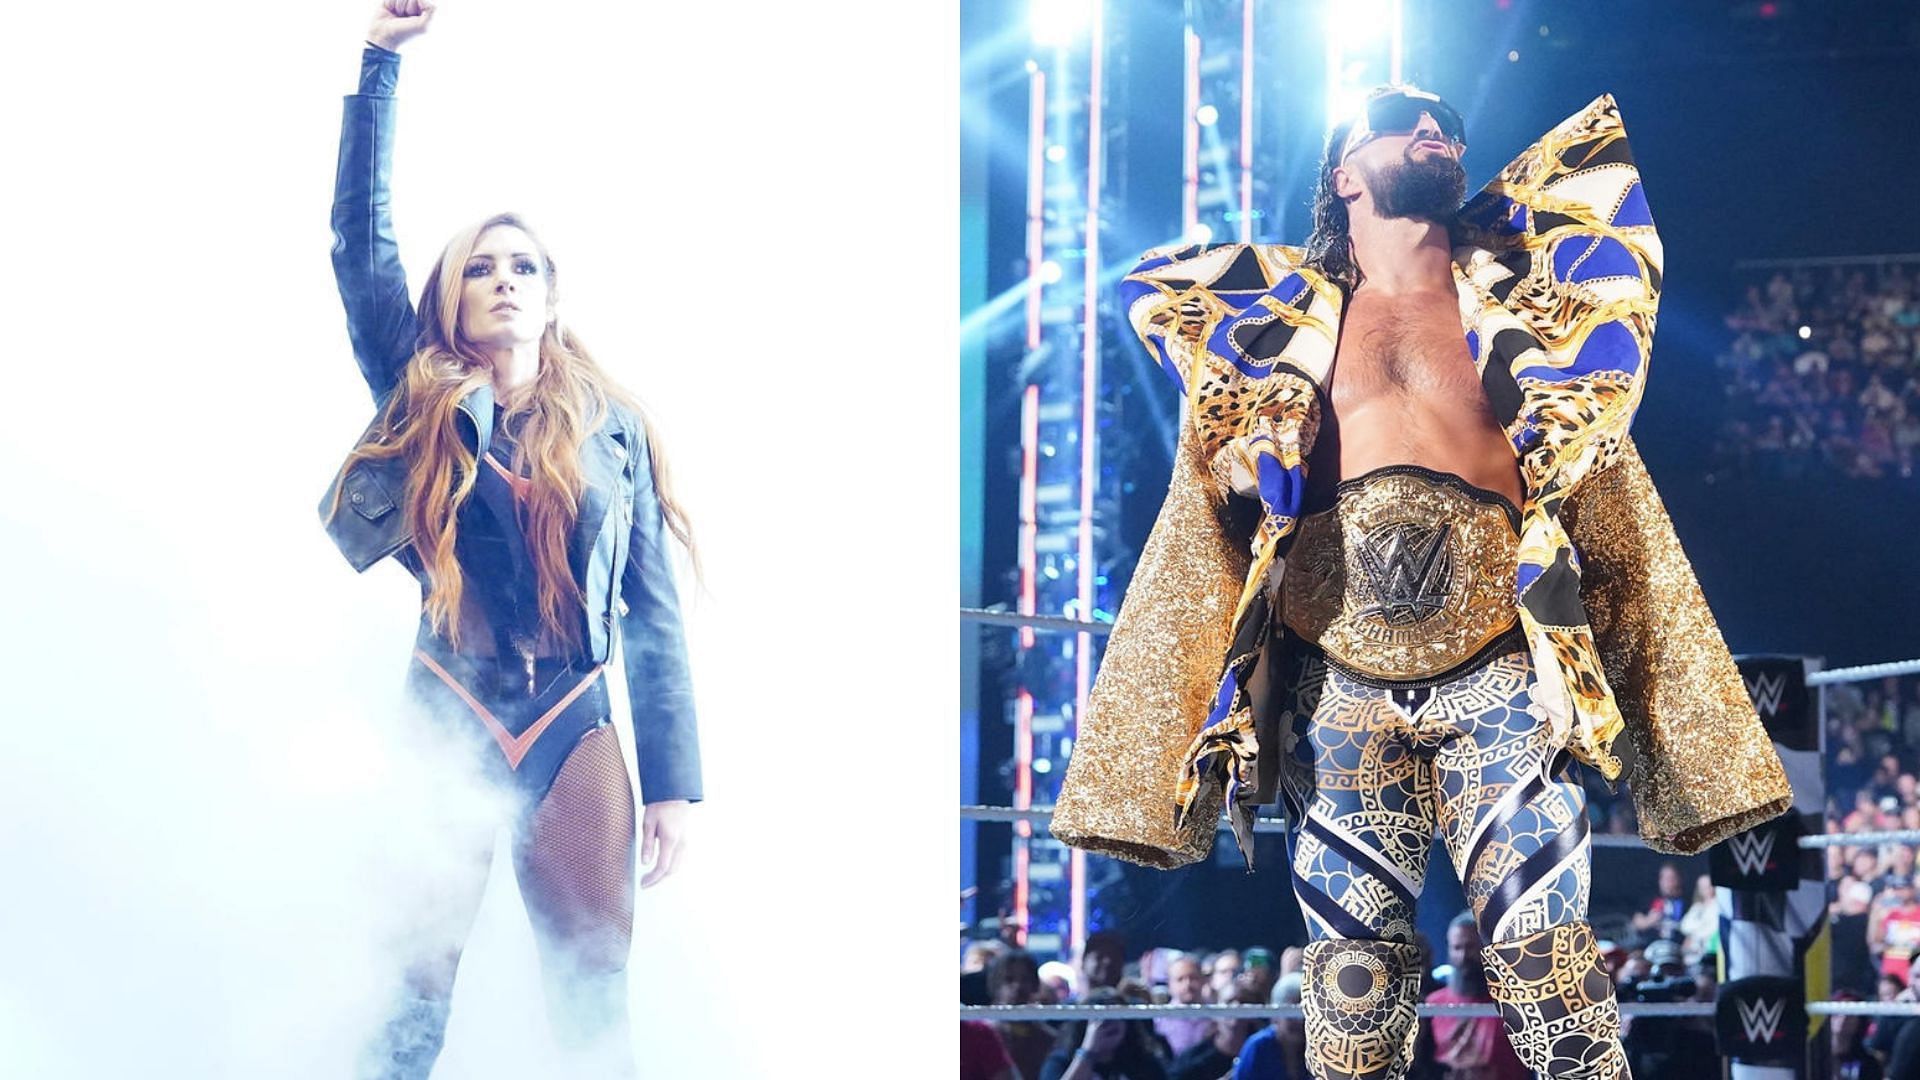 Becky Lynch sent a message to Seth Rollins in response to his Instagram post